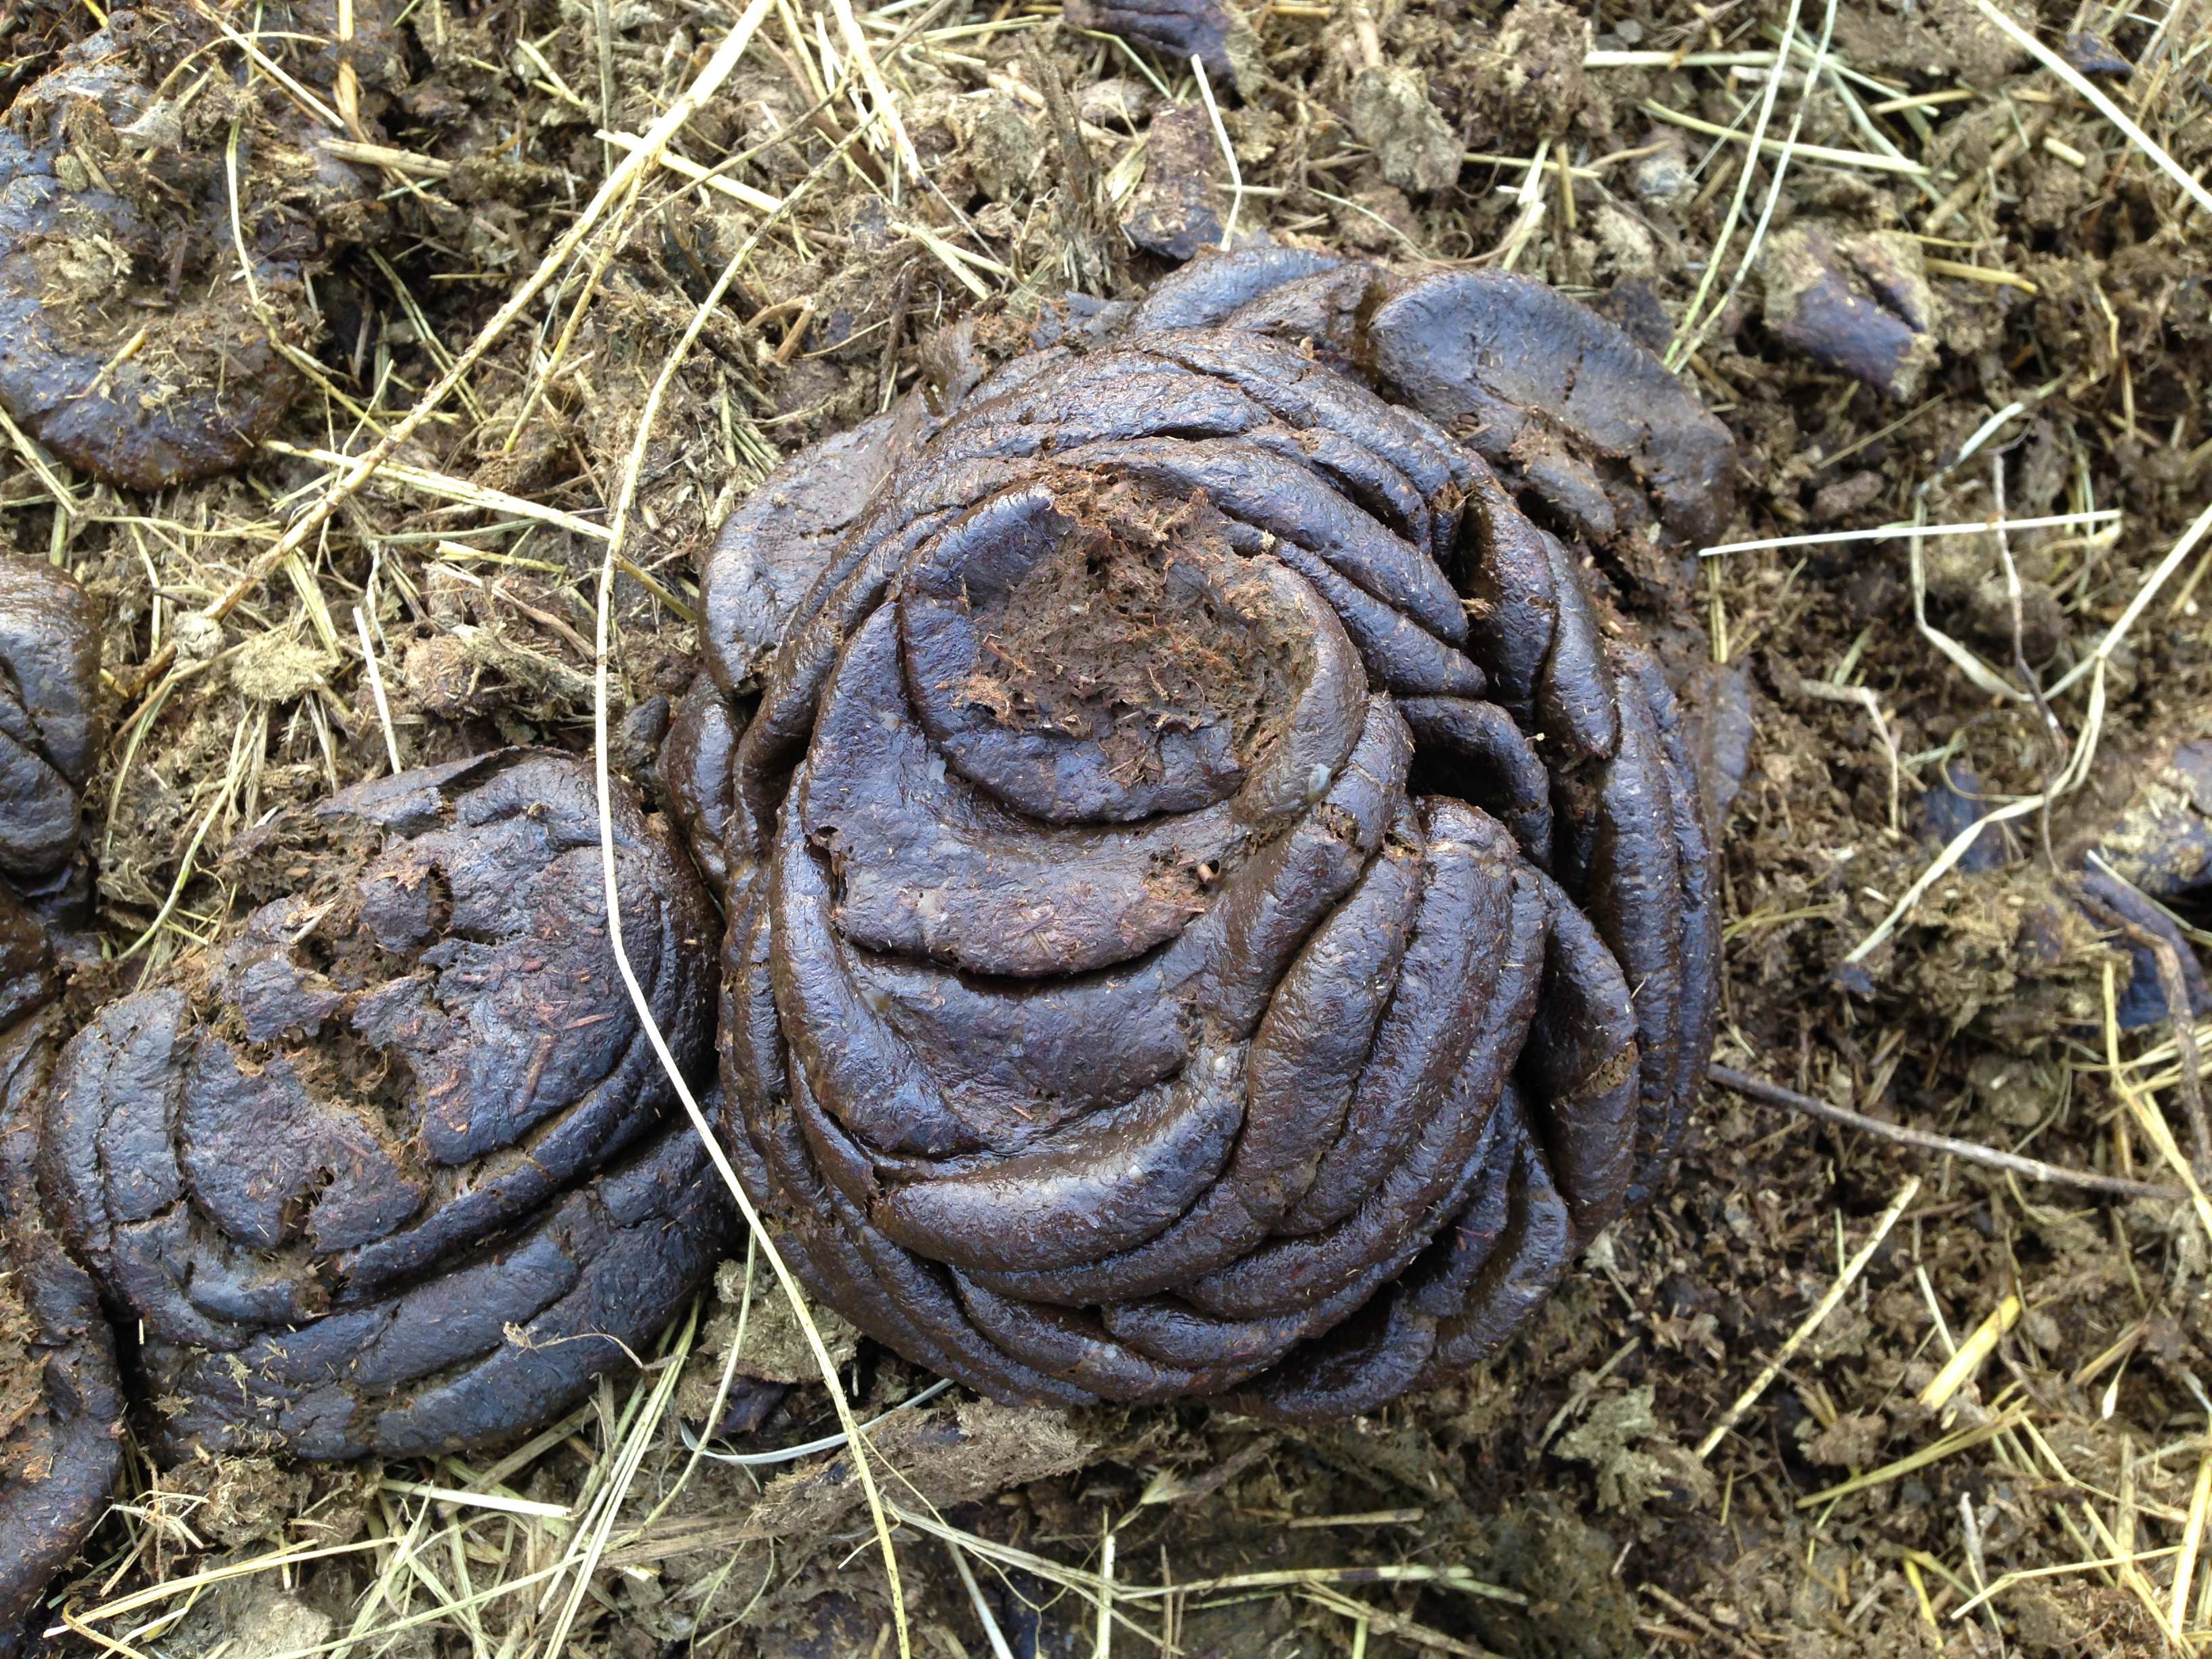 Cow manure patty that is over 2 inches tall with many well defined rings throughout and appears dry.